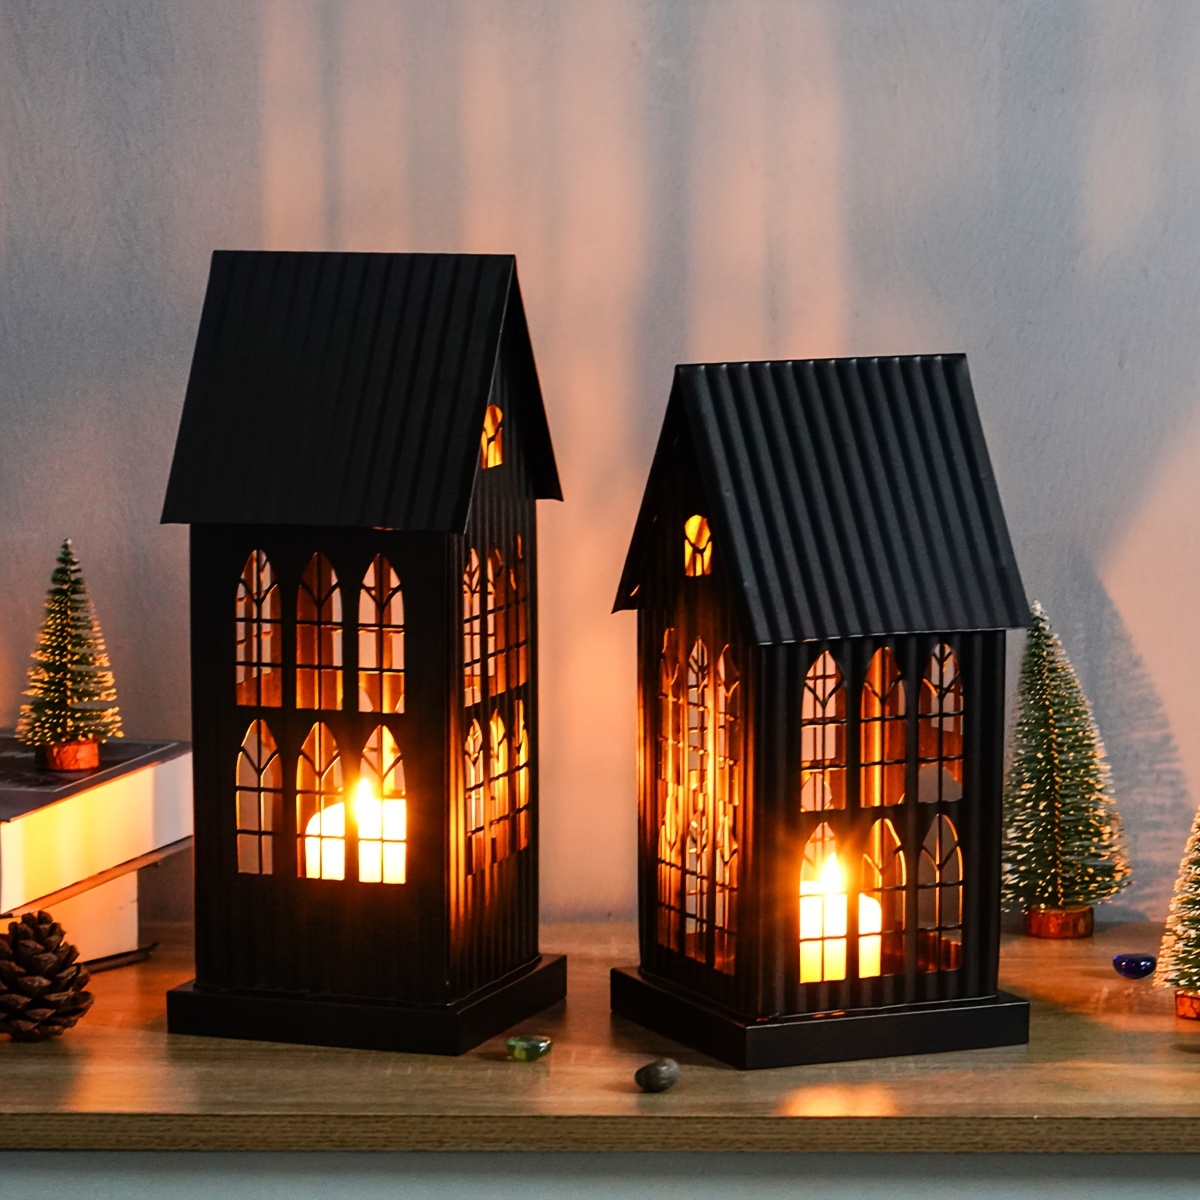 

1pc Wrought Iron Black House Sub Candle Holder, Party Outdoor Wedding Season Decoration, Christmas Halloween Home Dining Room Living Room Bedroom Garden Decoration, Without Candles